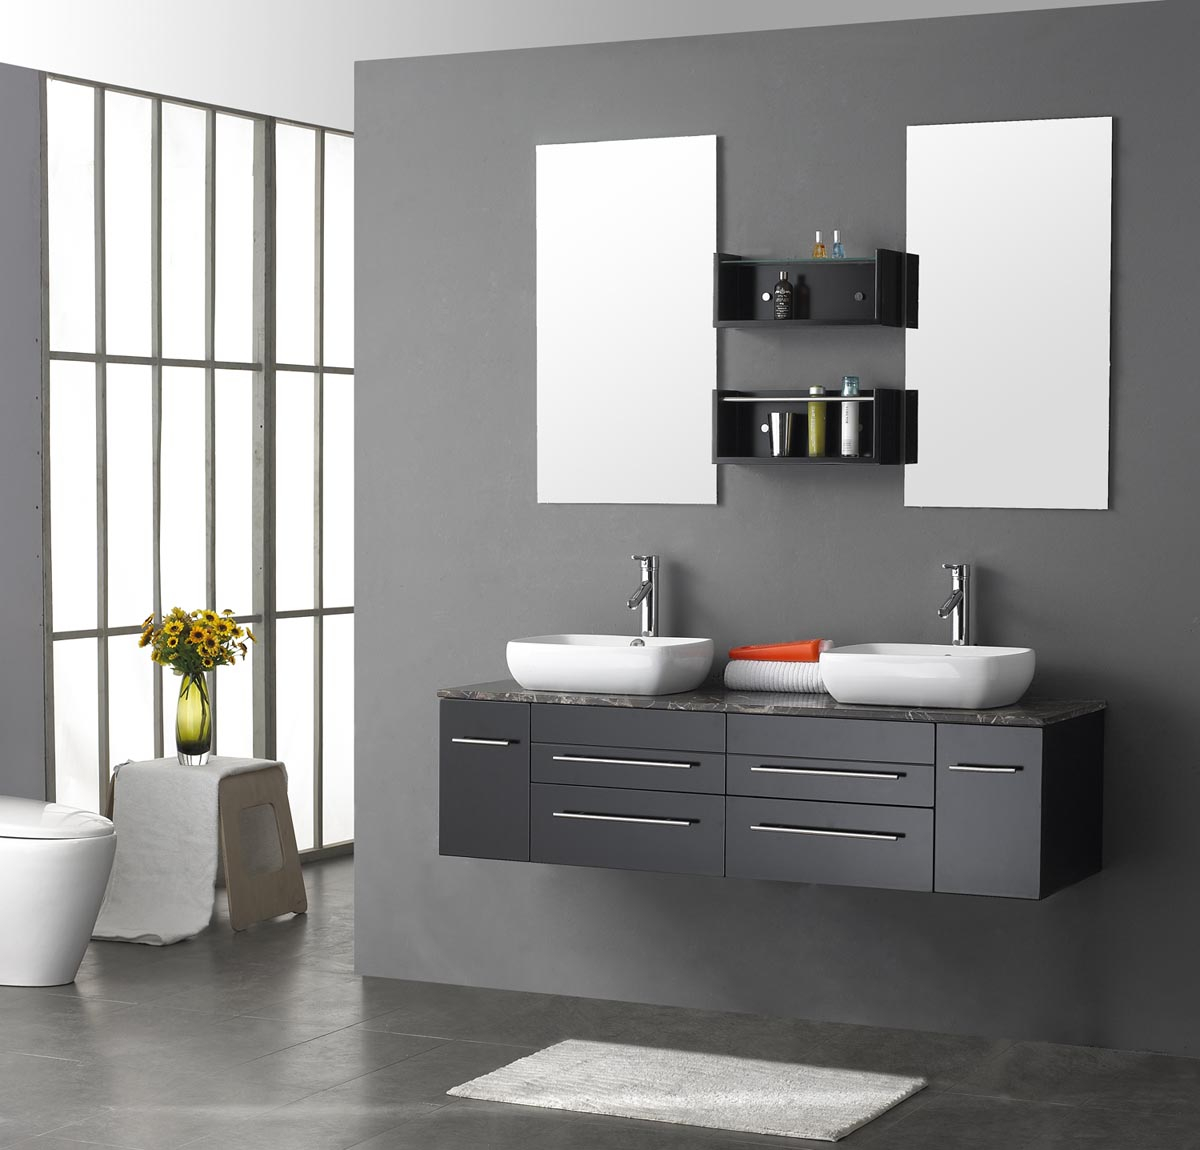 Bathroom Furniture Sets Vanity Cyclest Bathroom Designs Ideas intended for size 1200 X 1150